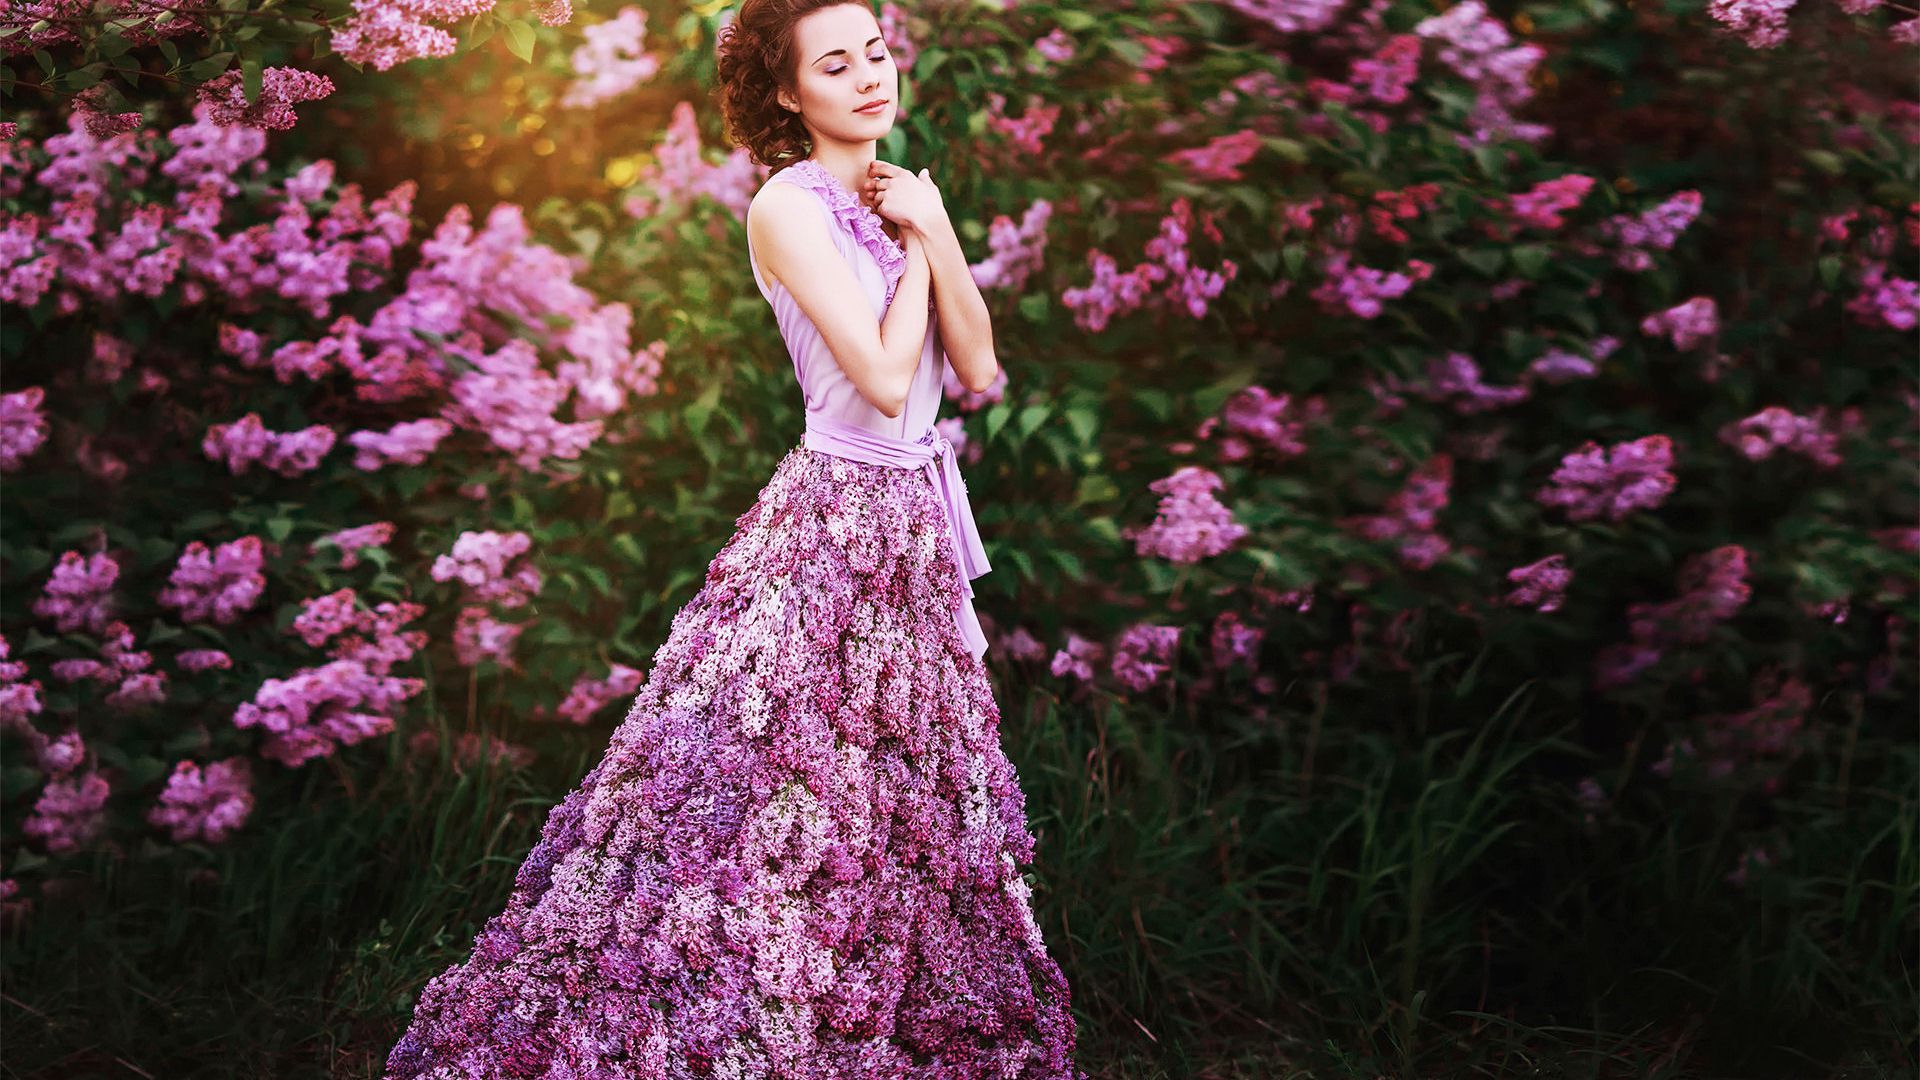 lovely flowers background wallpaper,dress,pink,lilac,purple,clothing